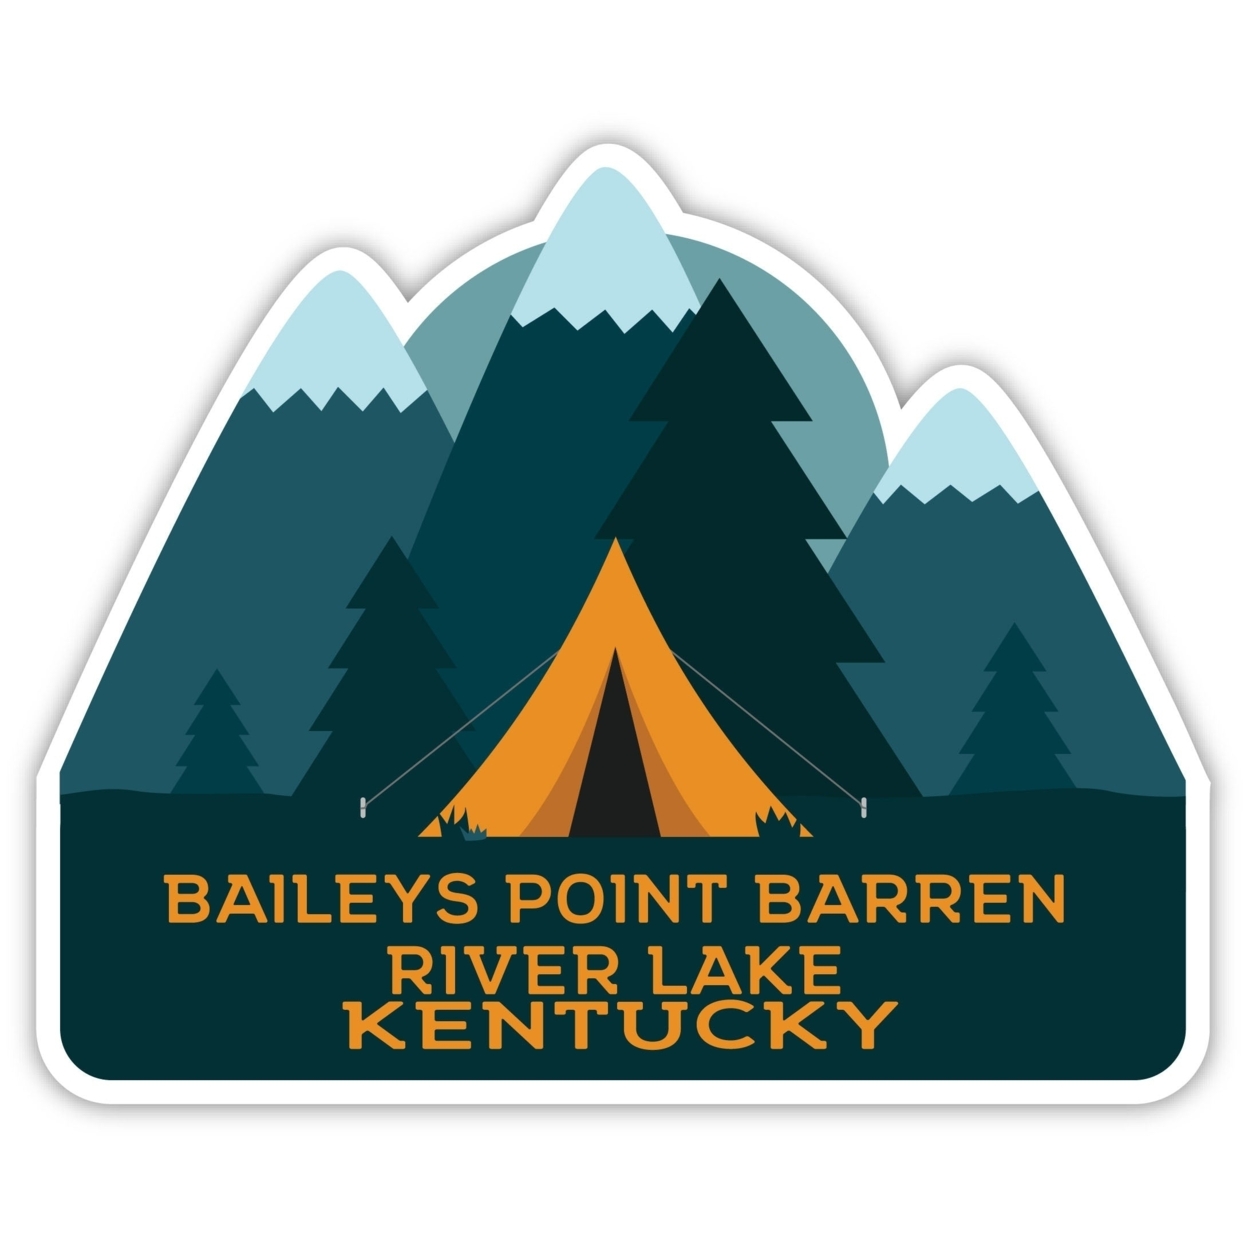 Baileys Point Barren River Lake Kentucky Souvenir Decorative Stickers (Choose Theme And Size) - 4-Pack, 10-Inch, Tent